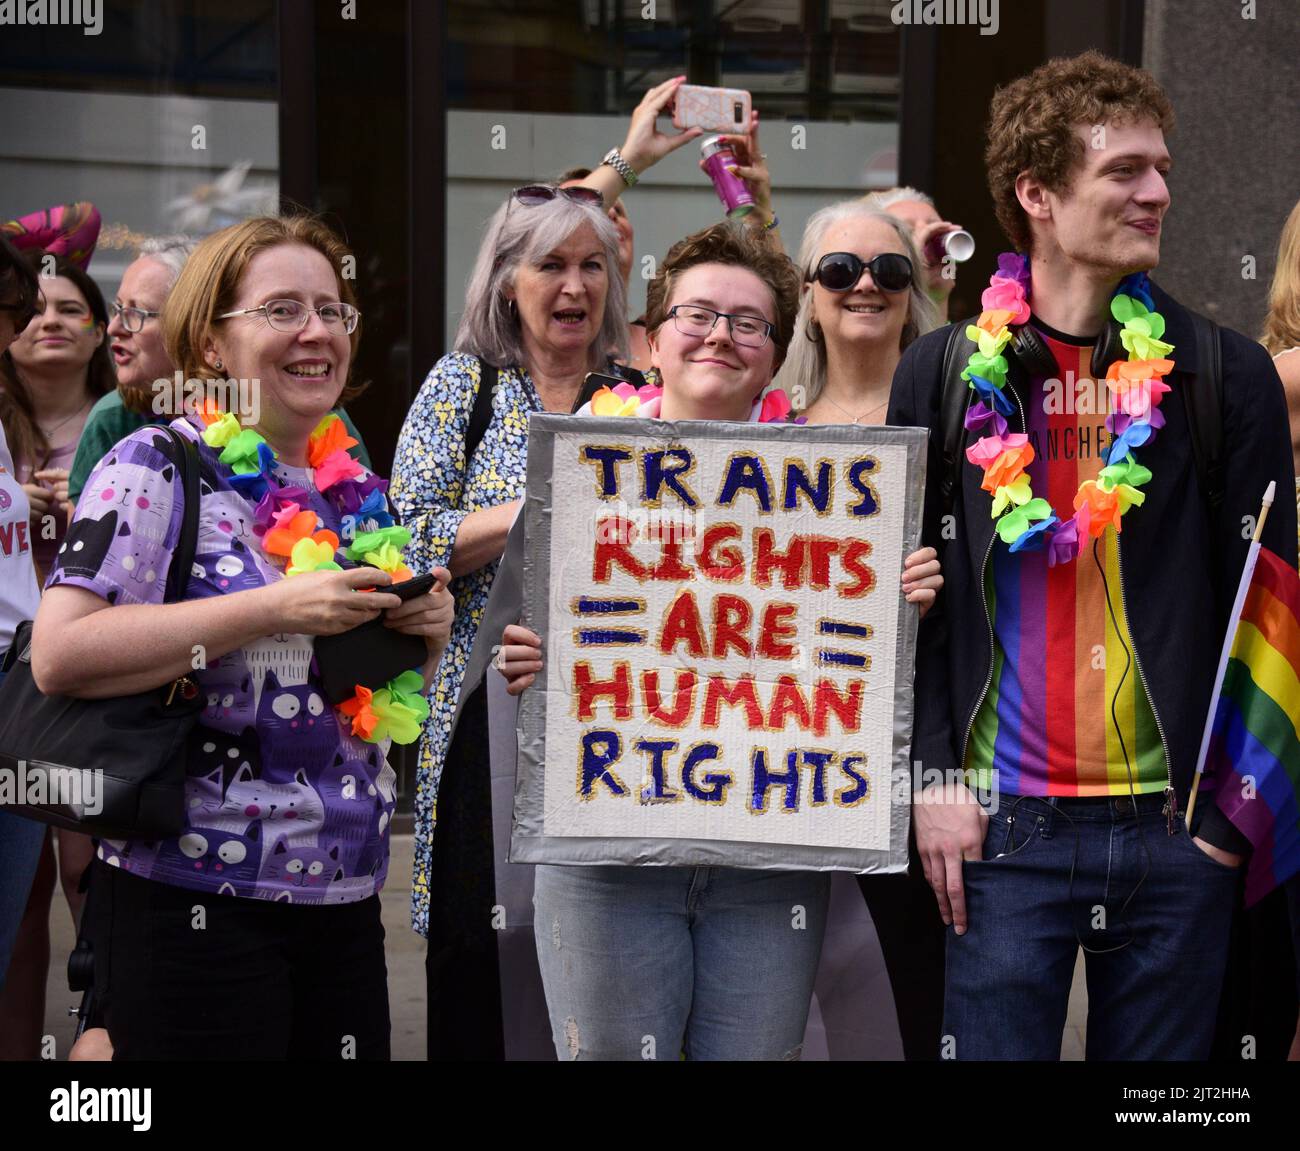 Manchester, UK. 27th August, 2022. A person carries a placard: 'Trans rights are human rights'.  Participants take part in the LGBTQ+ Pride parade, central Manchester, UK, as LGBTQ+ Pride continues over the Bank Holiday weekend 26th to 29th August. Organisers say: 'Manchester Pride is one of the UK's leading LGBTQ+ charities. Our vision is a world where LGBTQ+ people are free to live and love without prejudice. We’re part of a global Pride movement celebrating LGBTQ+ equality and challenging discrimination.' Credit: Terry Waller/Alamy Live News Stock Photo